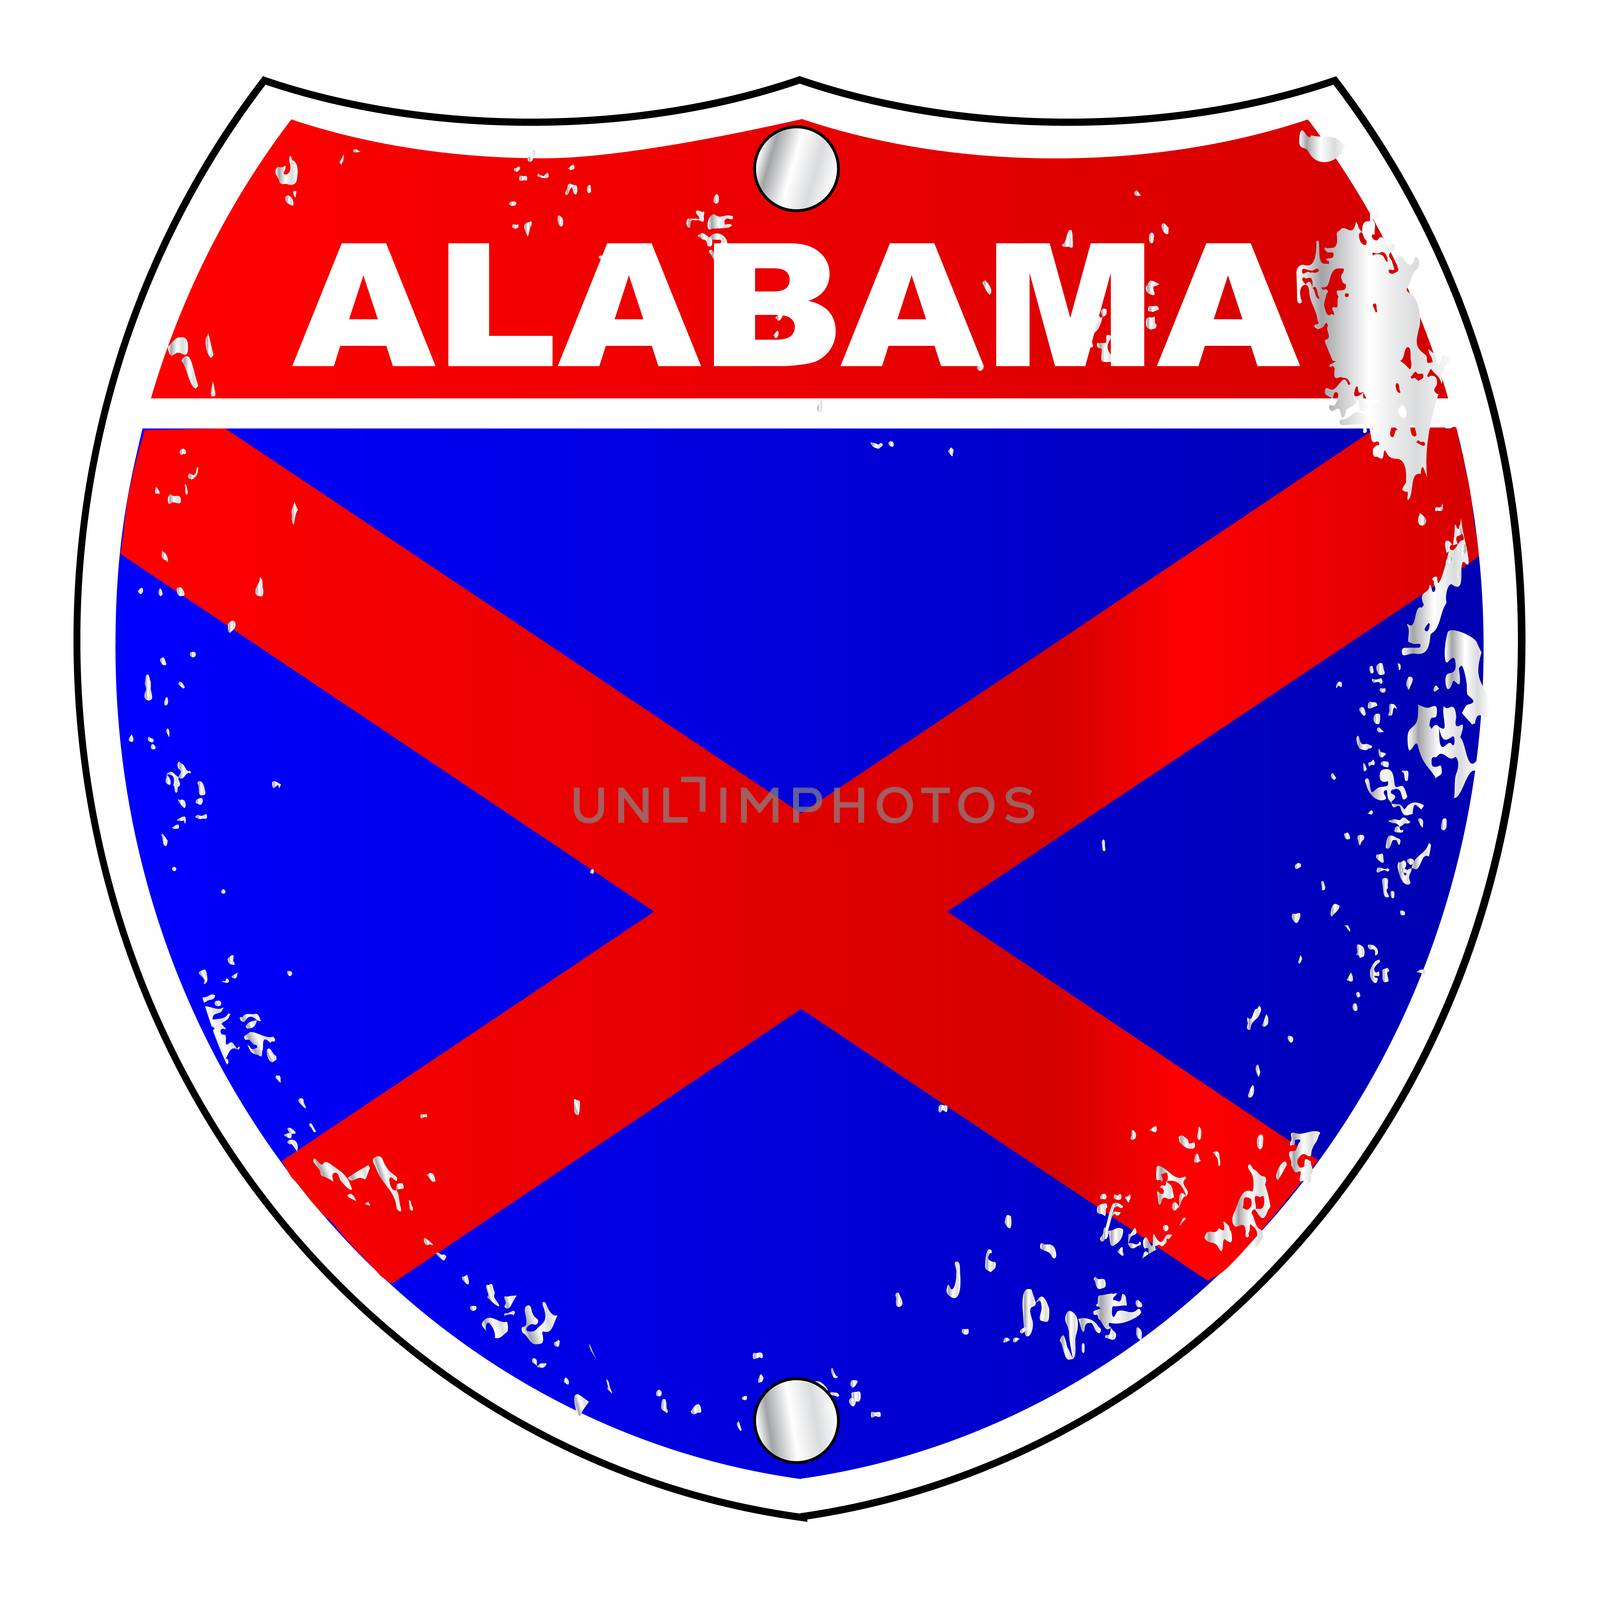 Alabama interstate sign with flag cross over a white background